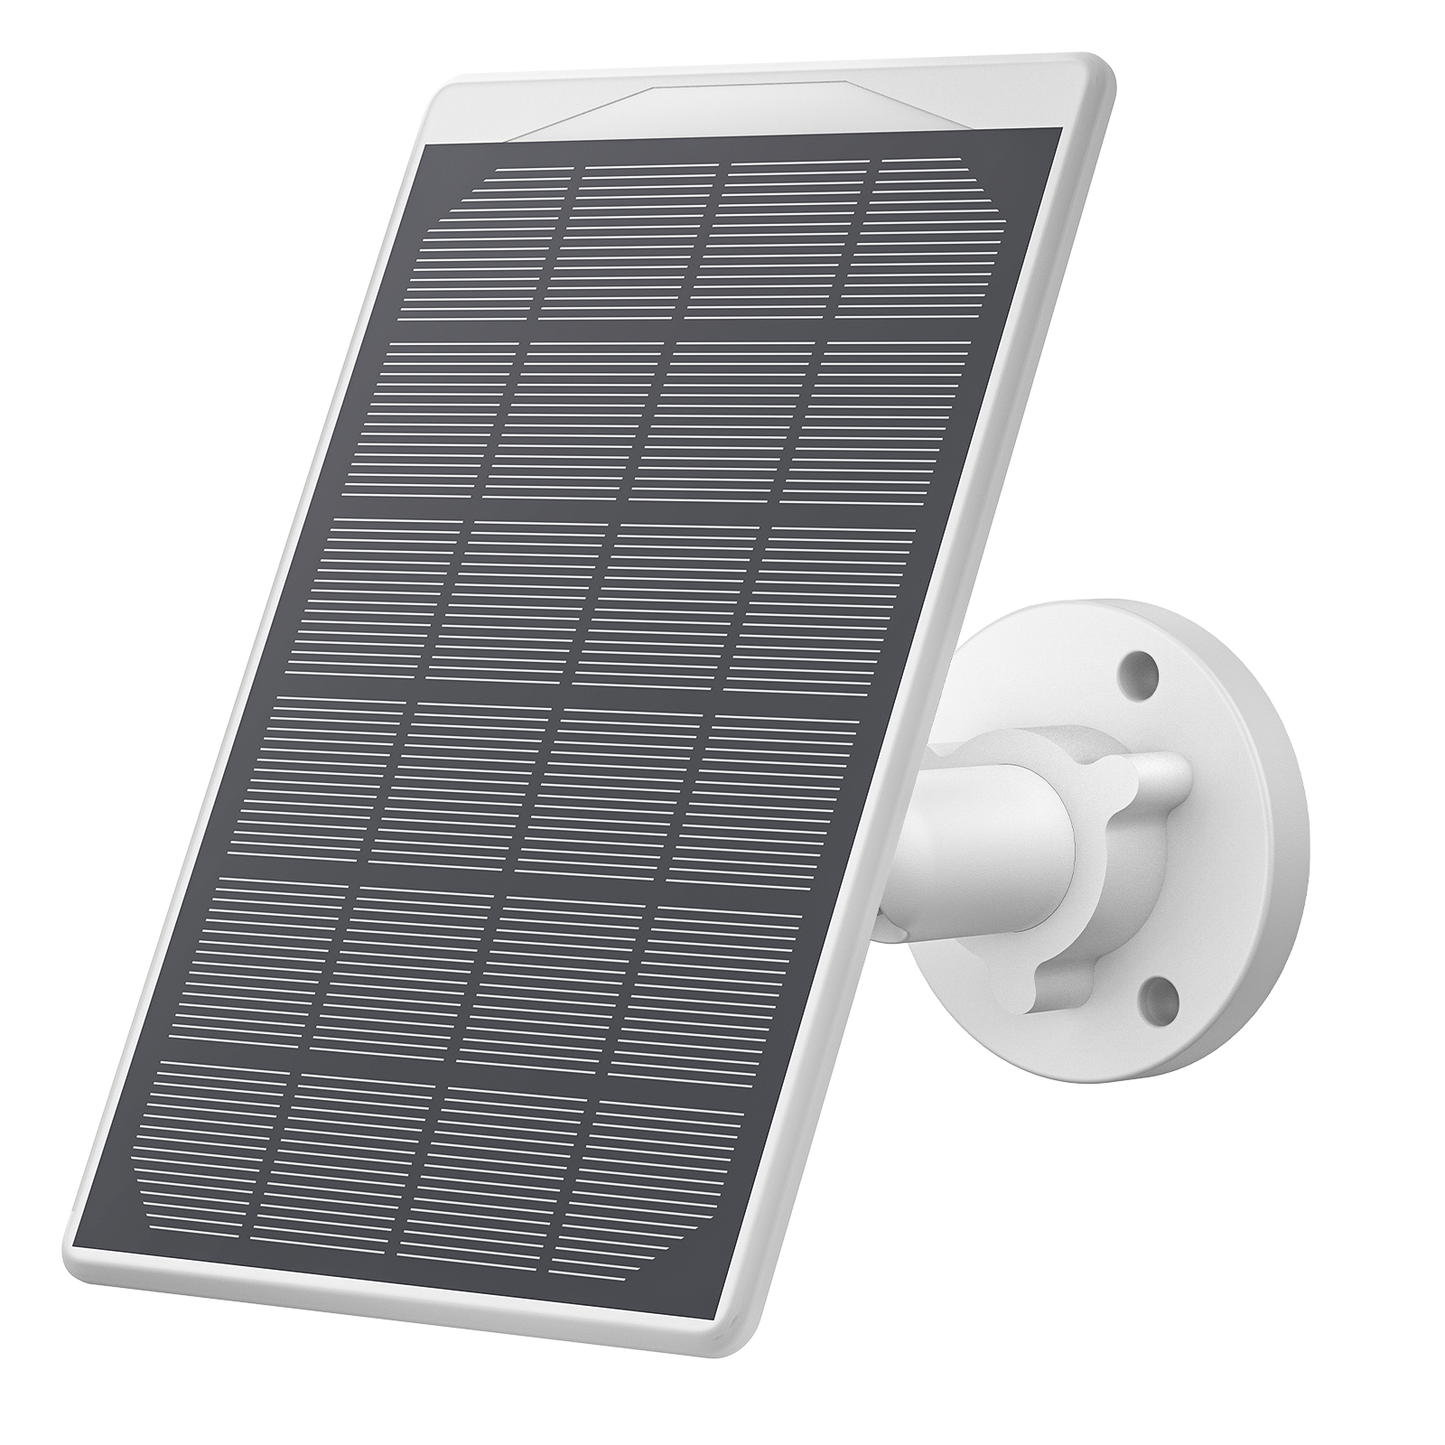 TOGUARD 3W Solar Panel for SC03 Battery Security Camera System